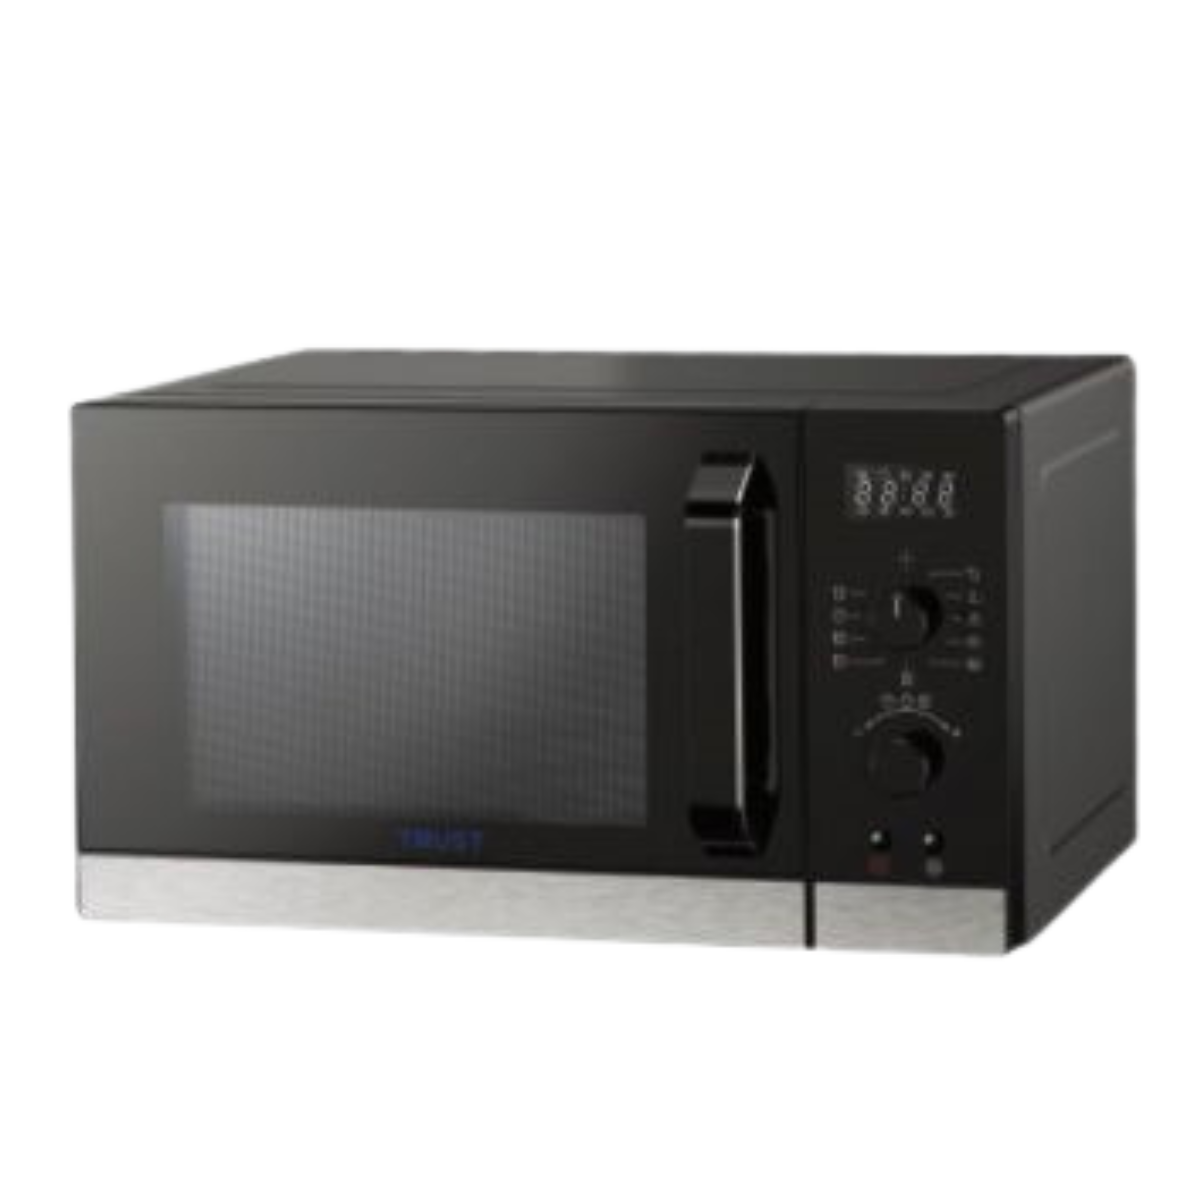 TRUST TMW932A MICROWAVE OVEN 25L